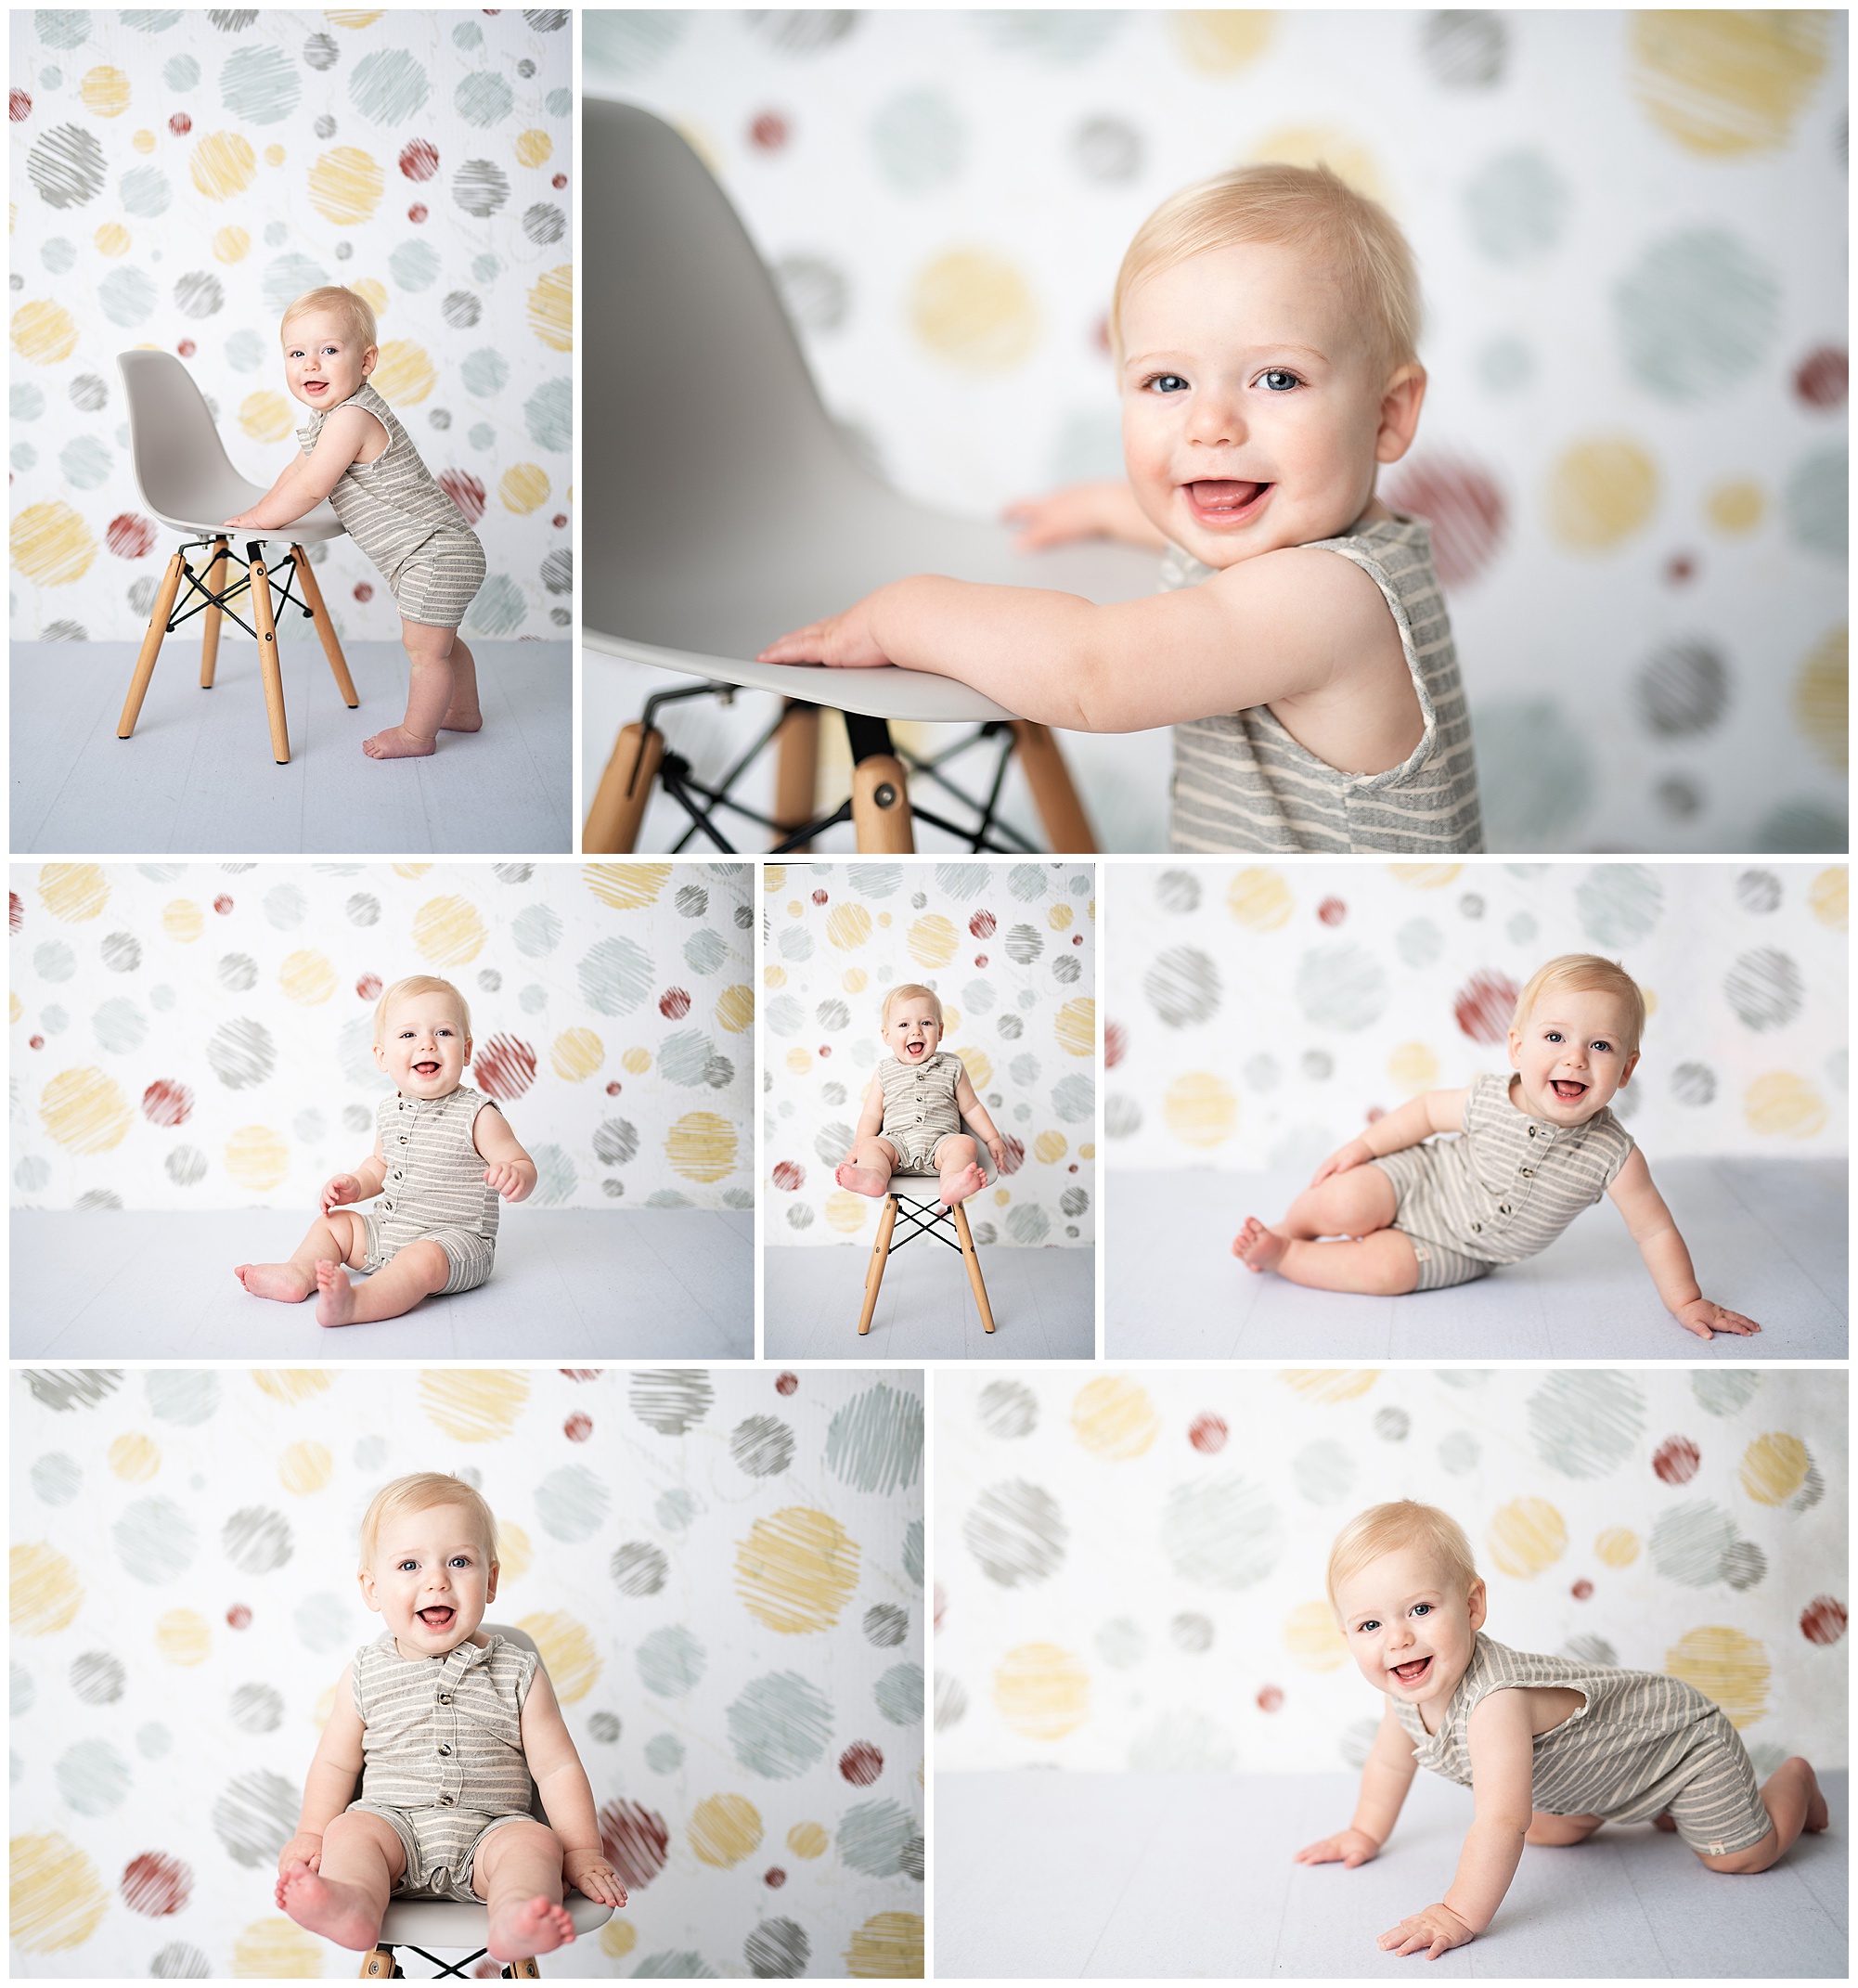 9 month old boy crawling In the studio with a dotted backdrop